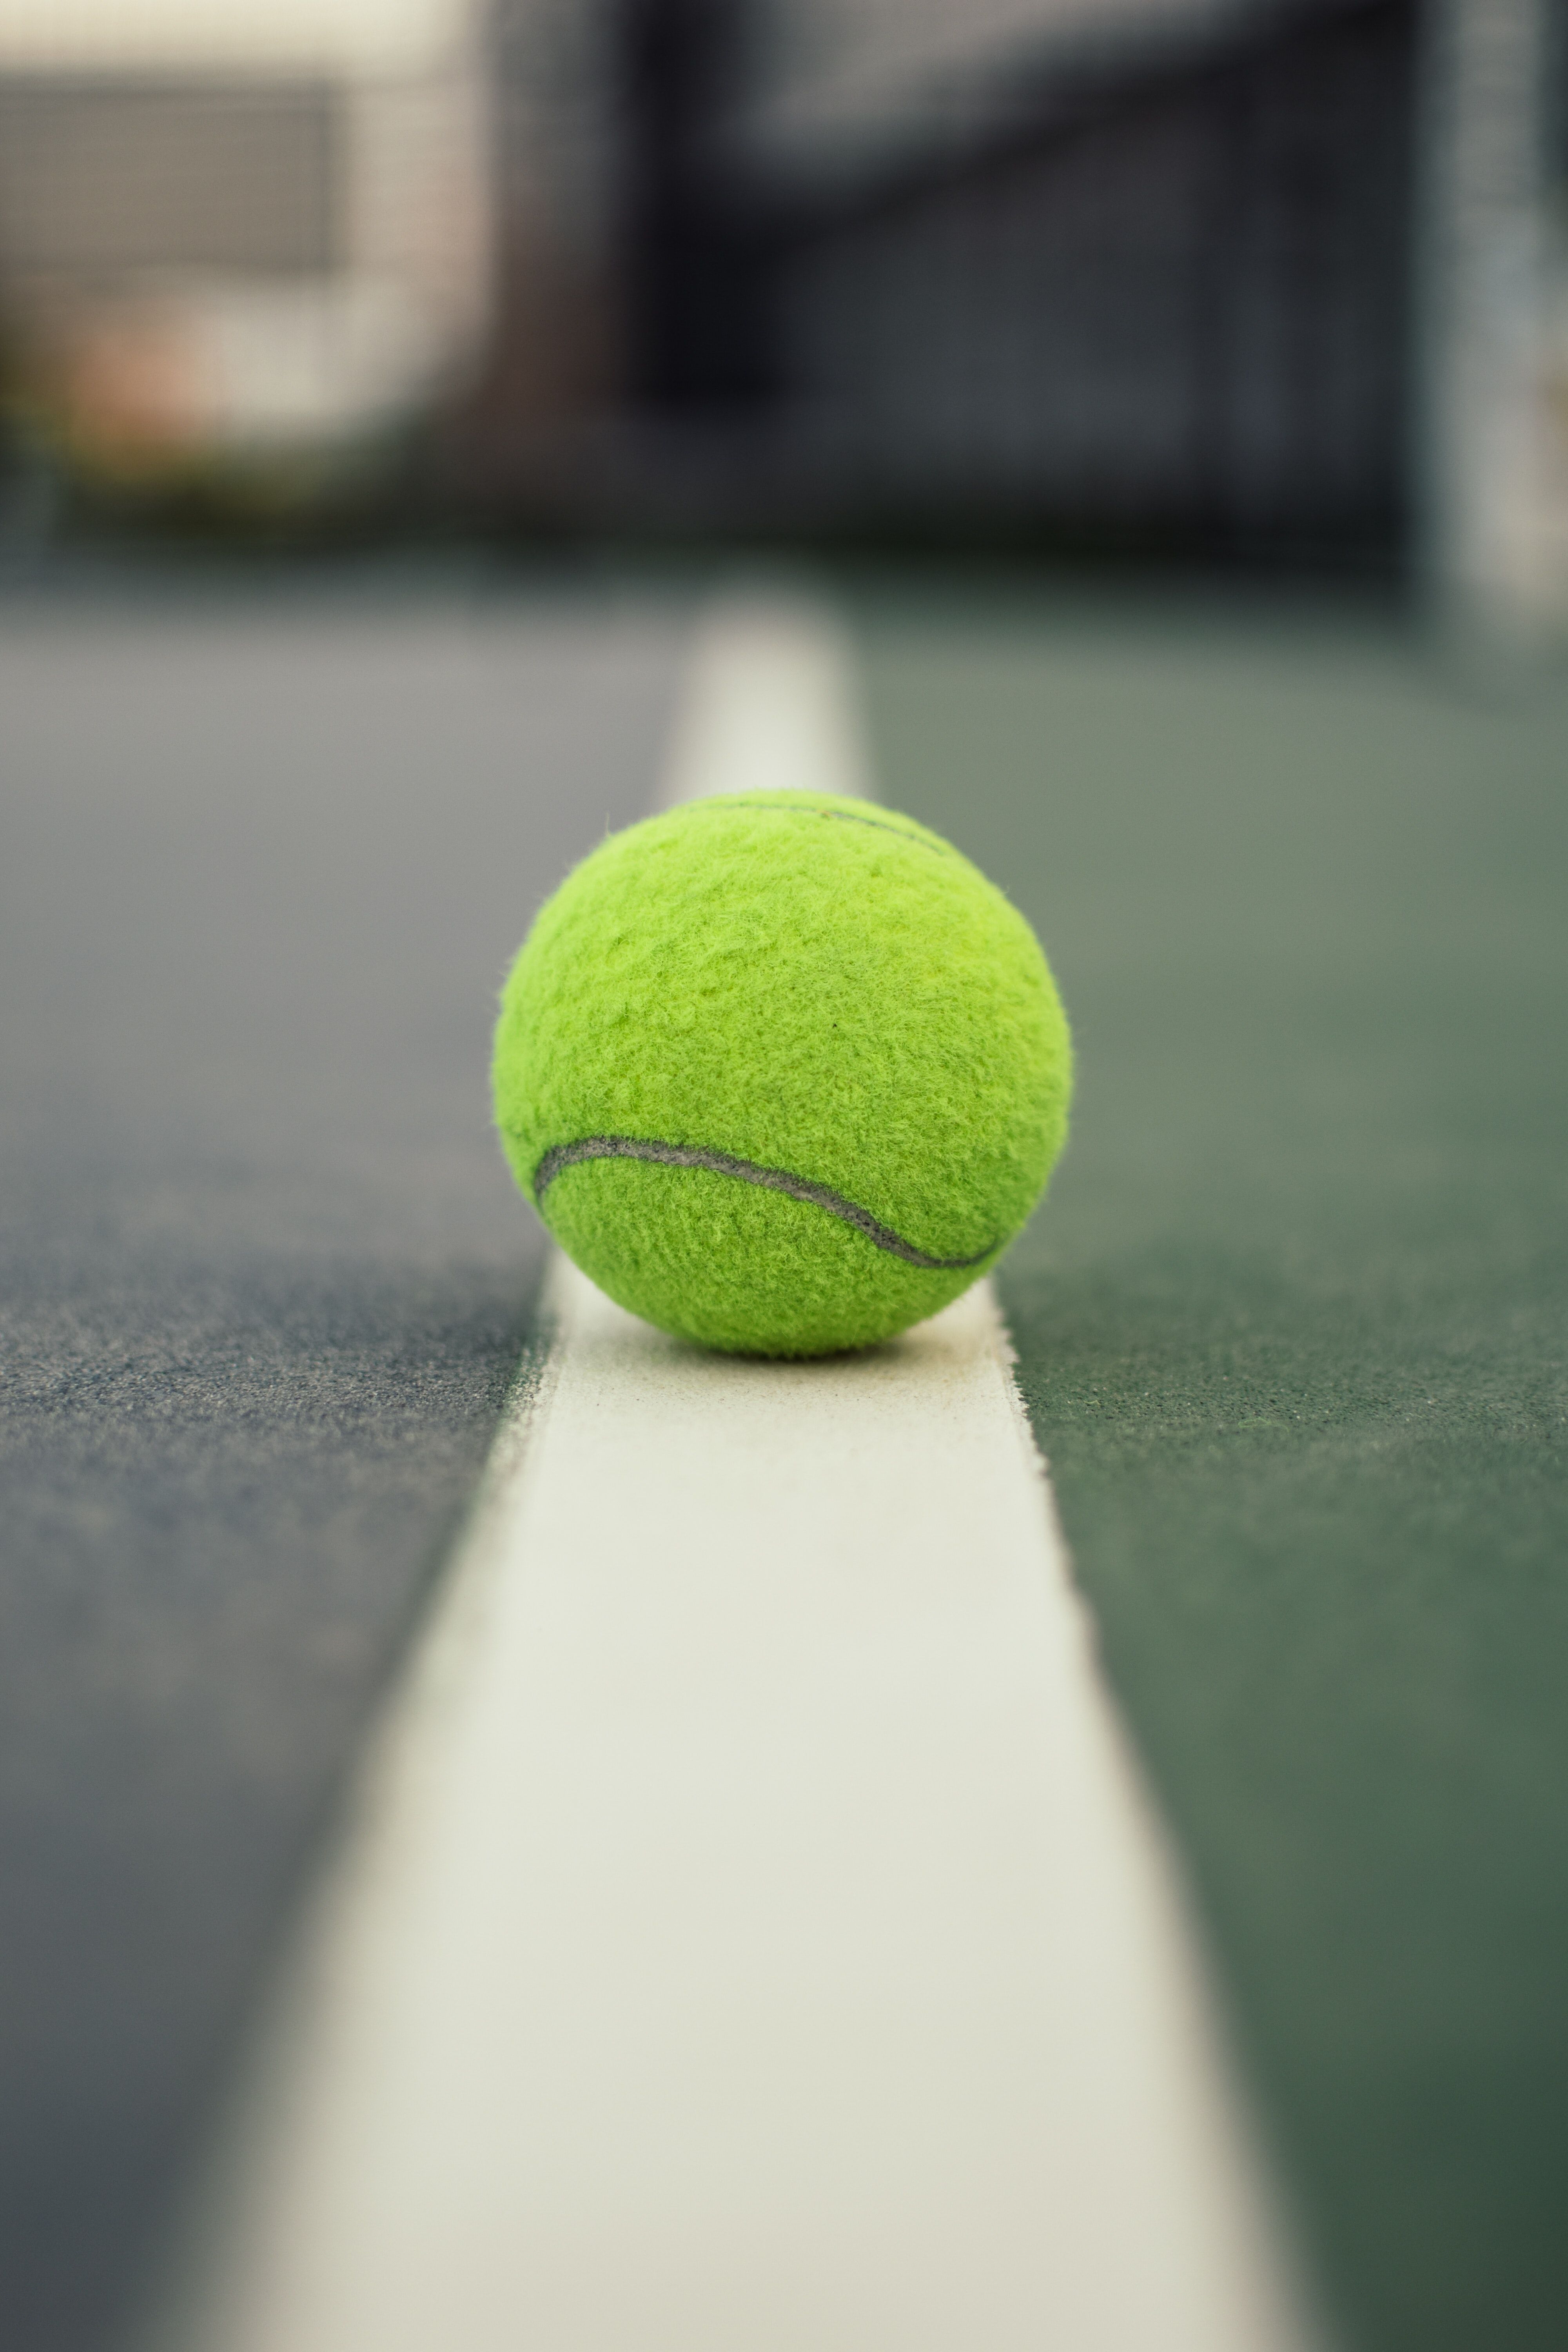 A tennis ball sitting on the edge of an outdoor court - Tennis